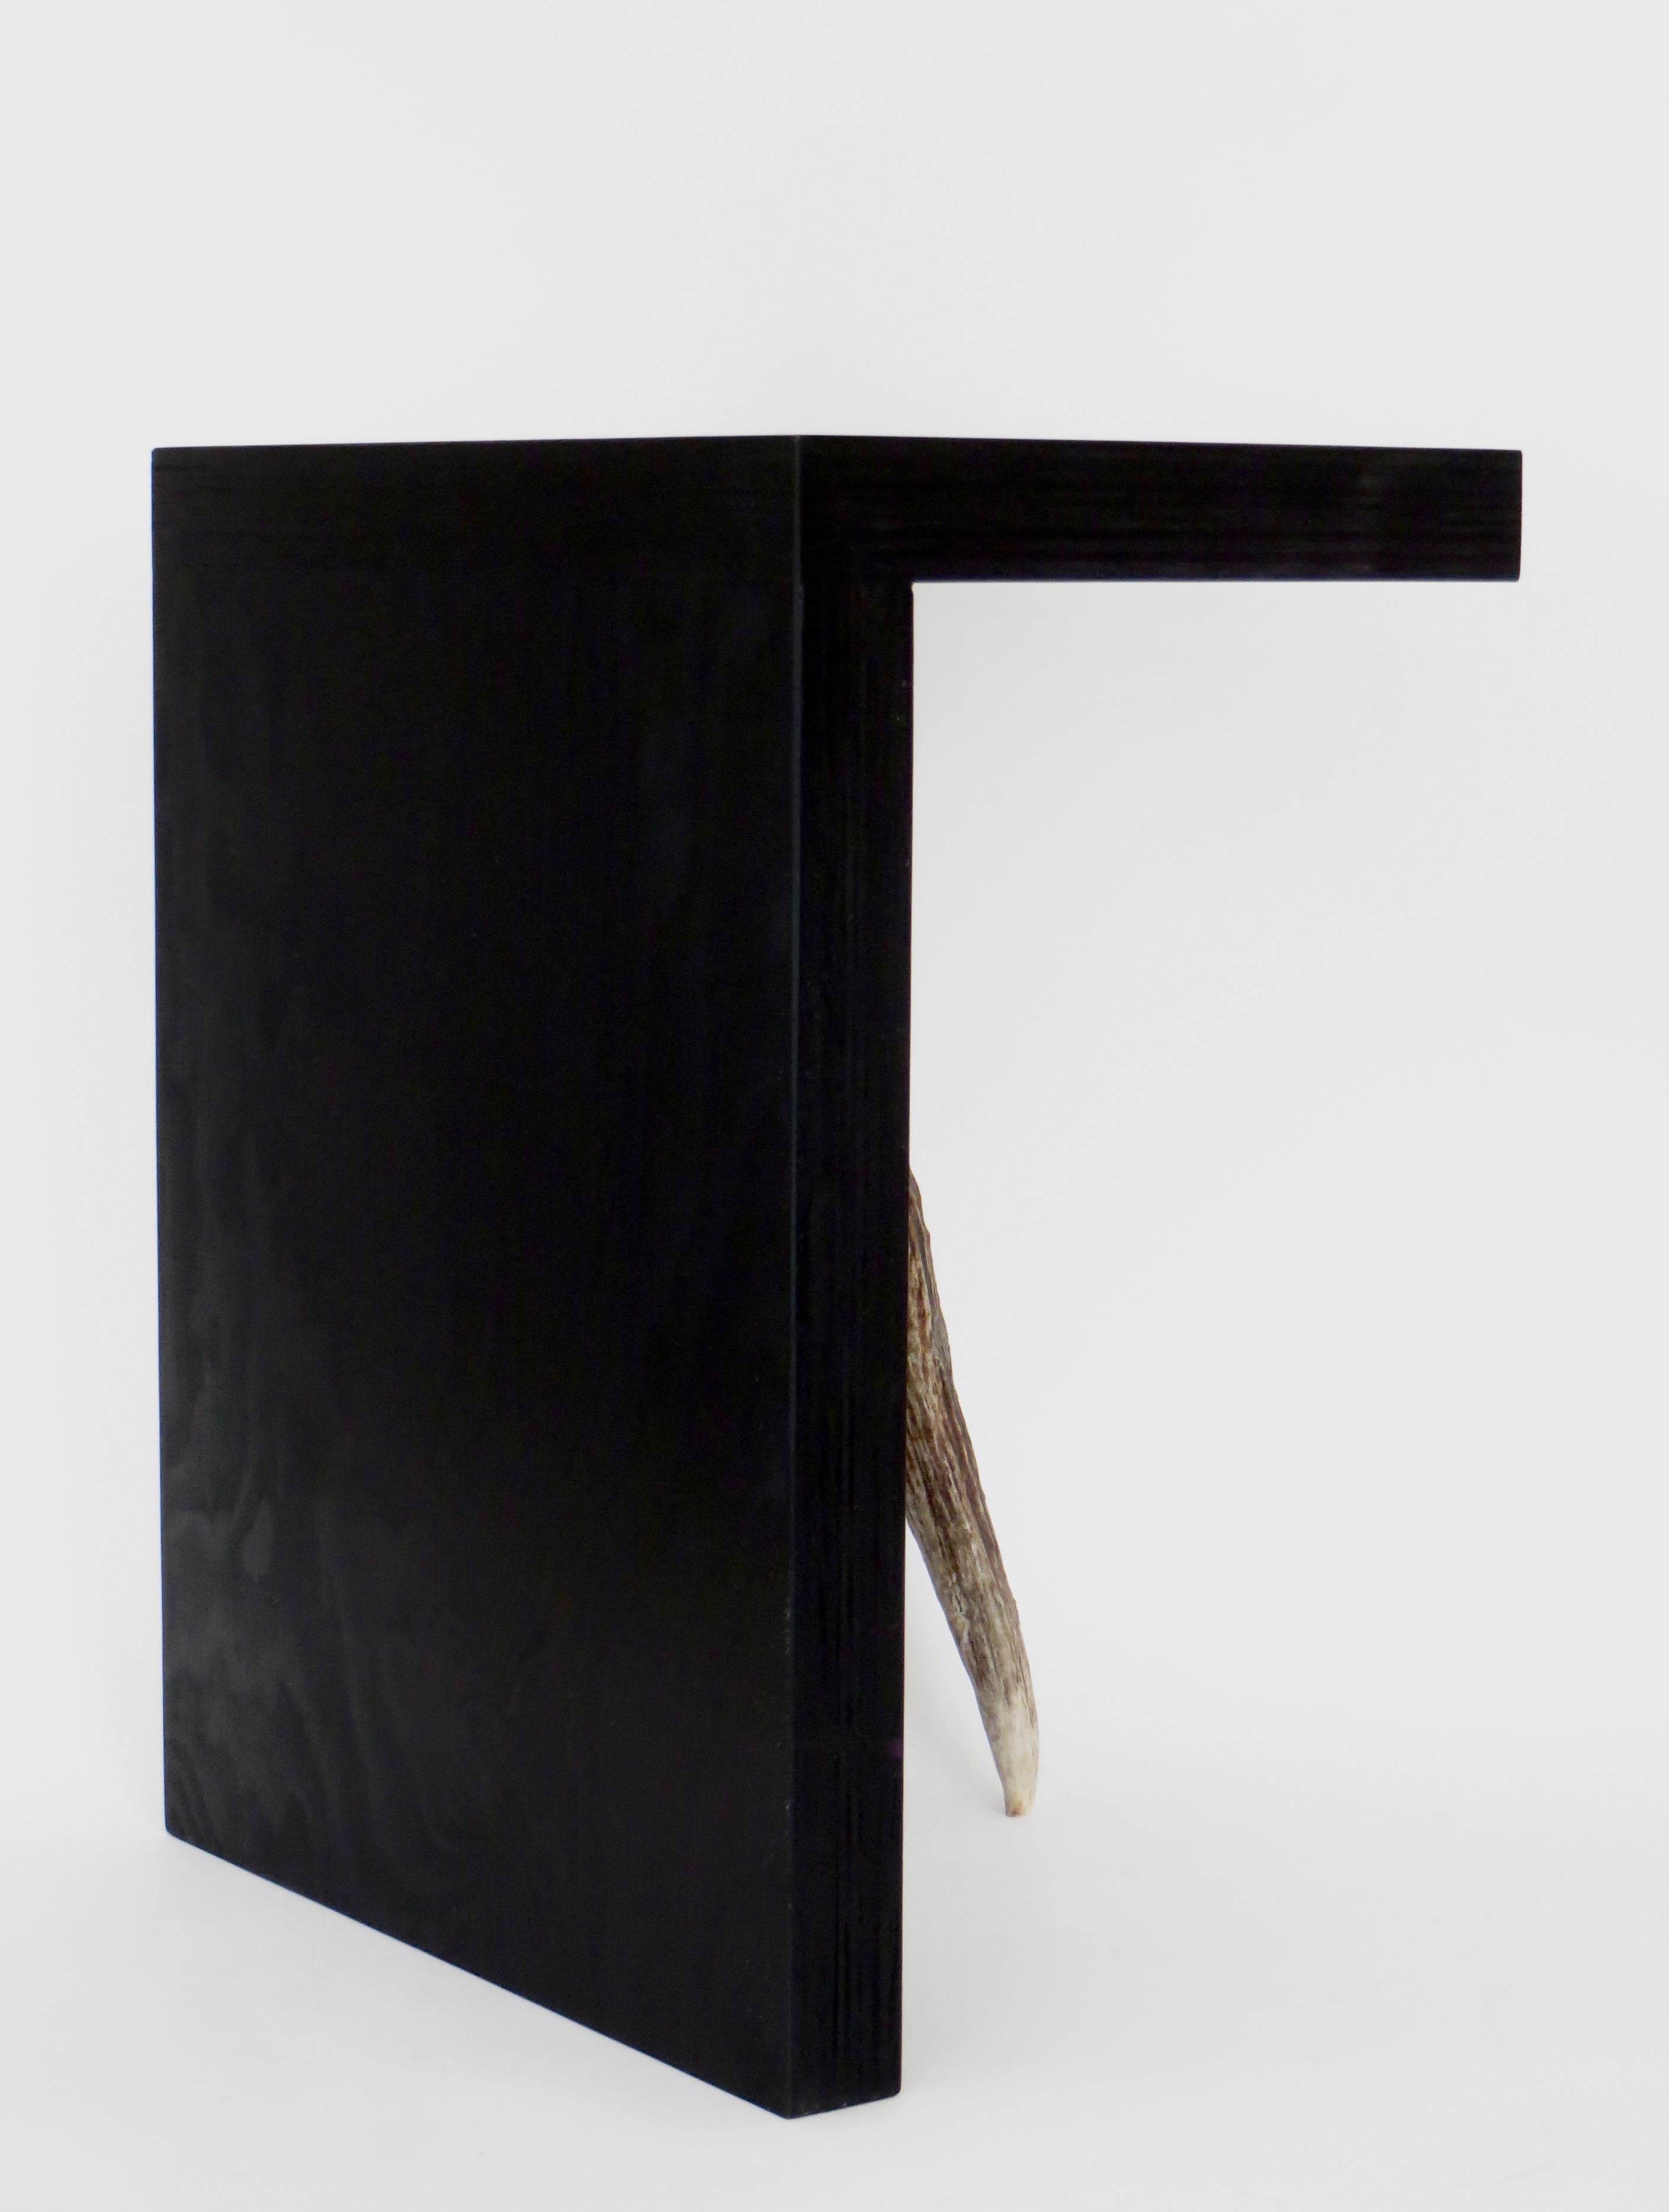 Plywood Rick Owens Stag T-Stool in Black Stained Wood